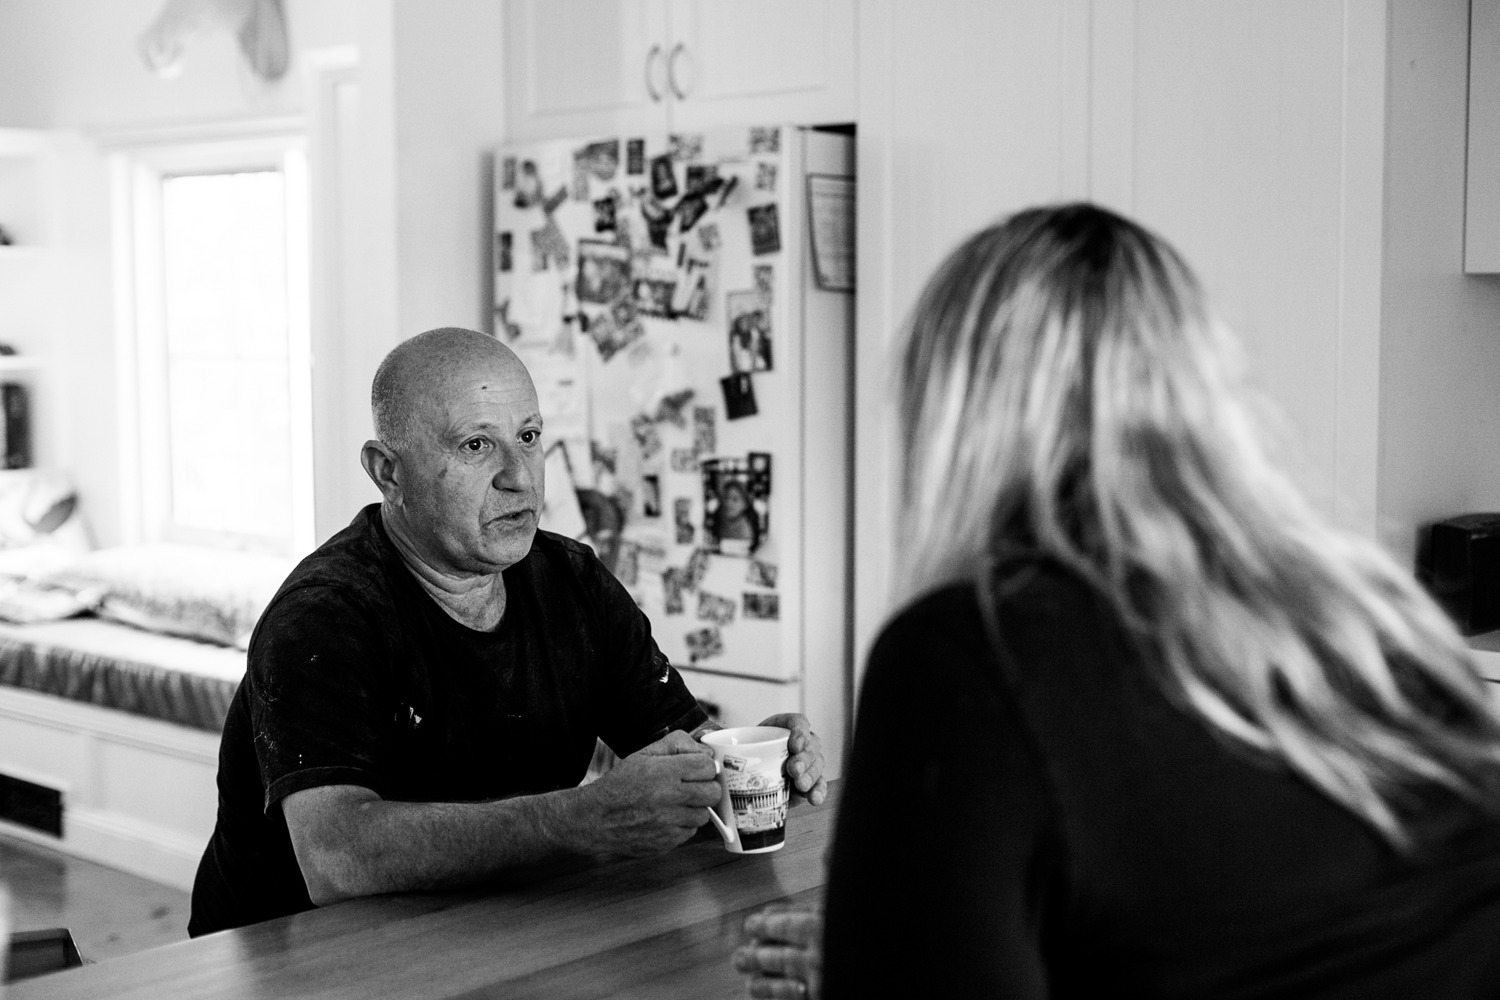 Black and white image of couple sitting at a kitchen bench in suburban home. Couple are in conversation with woman's back facing the camera.